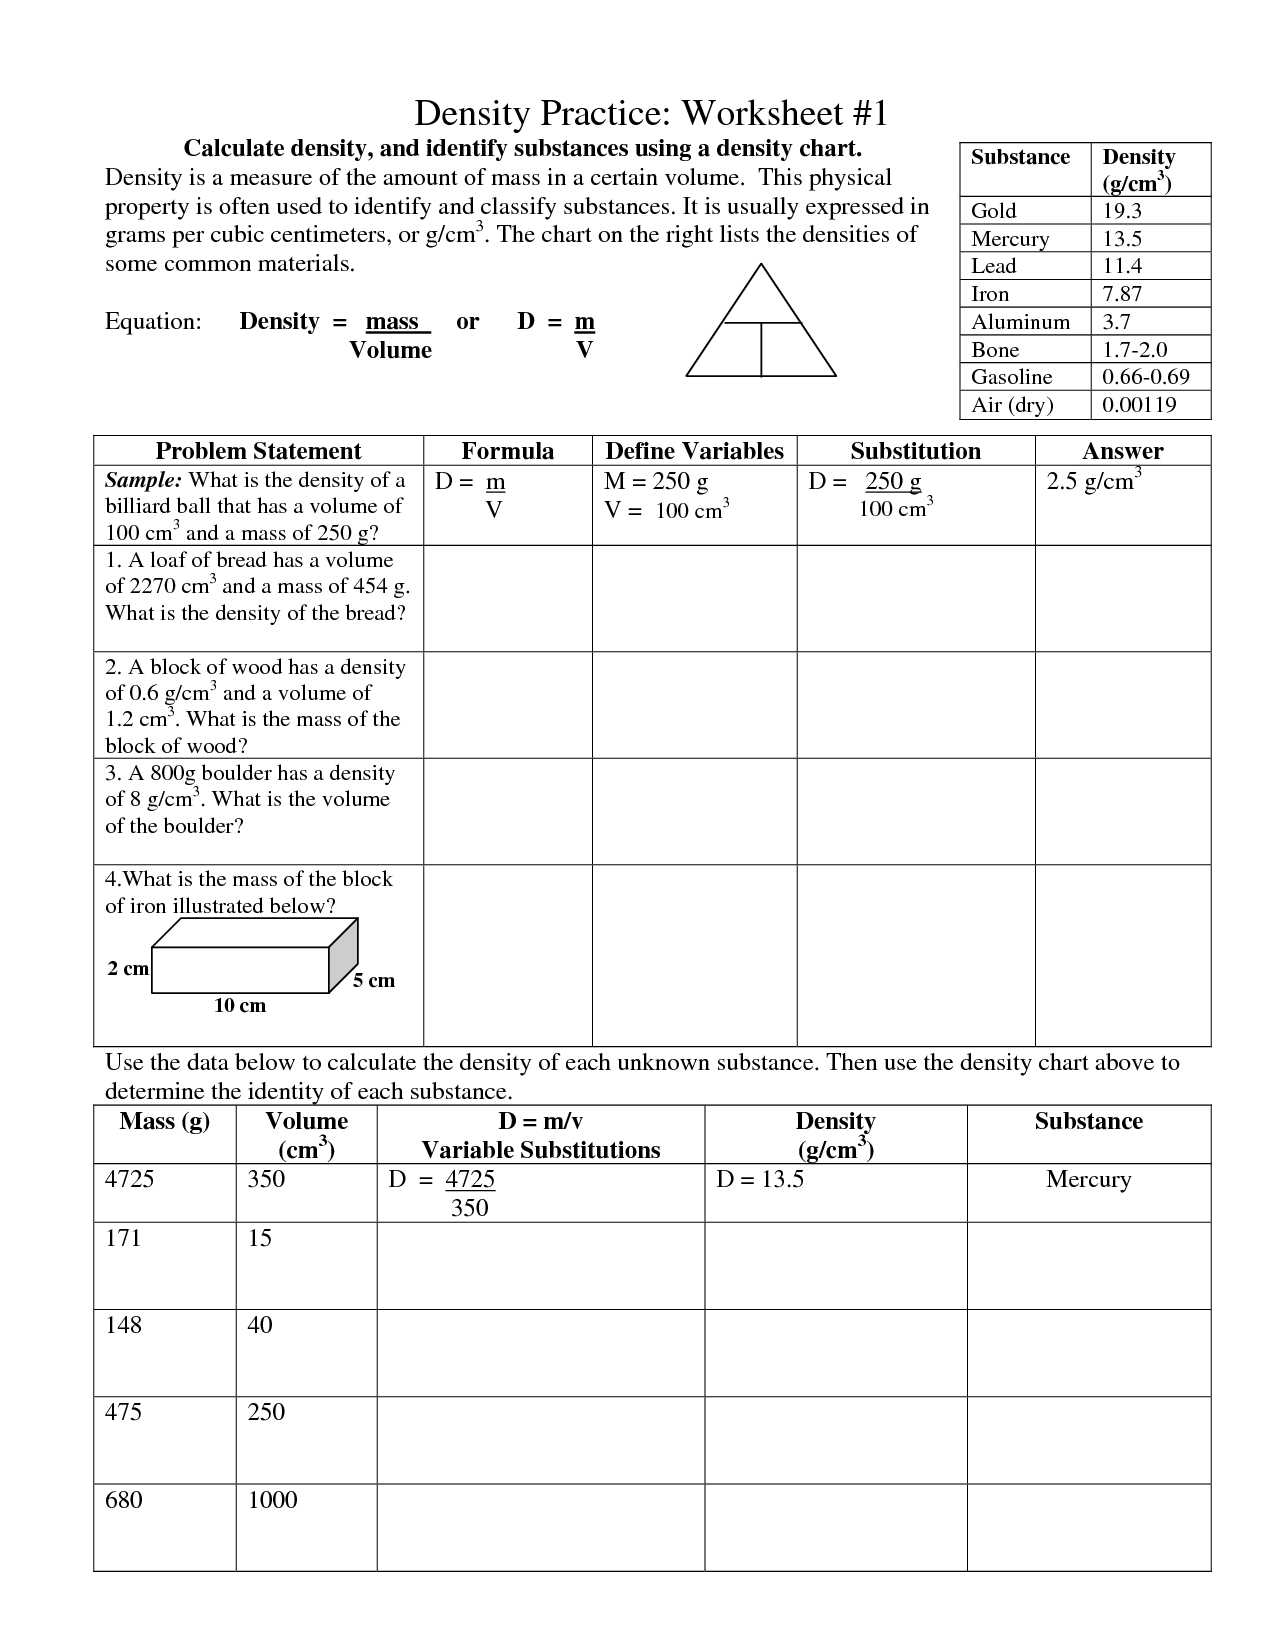 10 Best Images of Density Worksheet Answers  Density Calculations Worksheet Answers, Density 